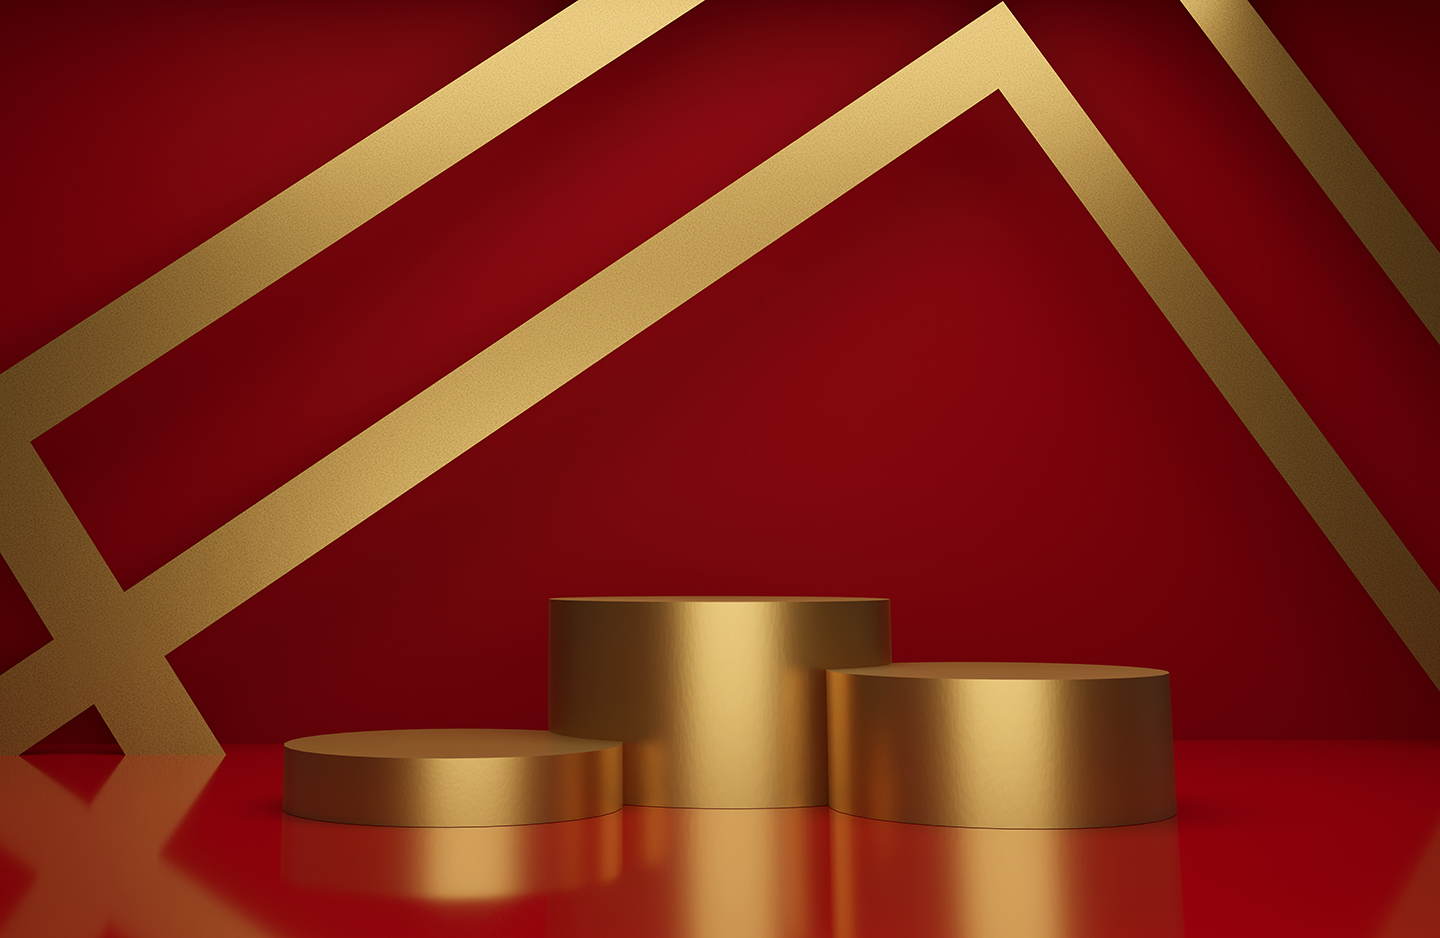 14 Product Display Podium Backgrounds, three golden podiums on red backgrounds.